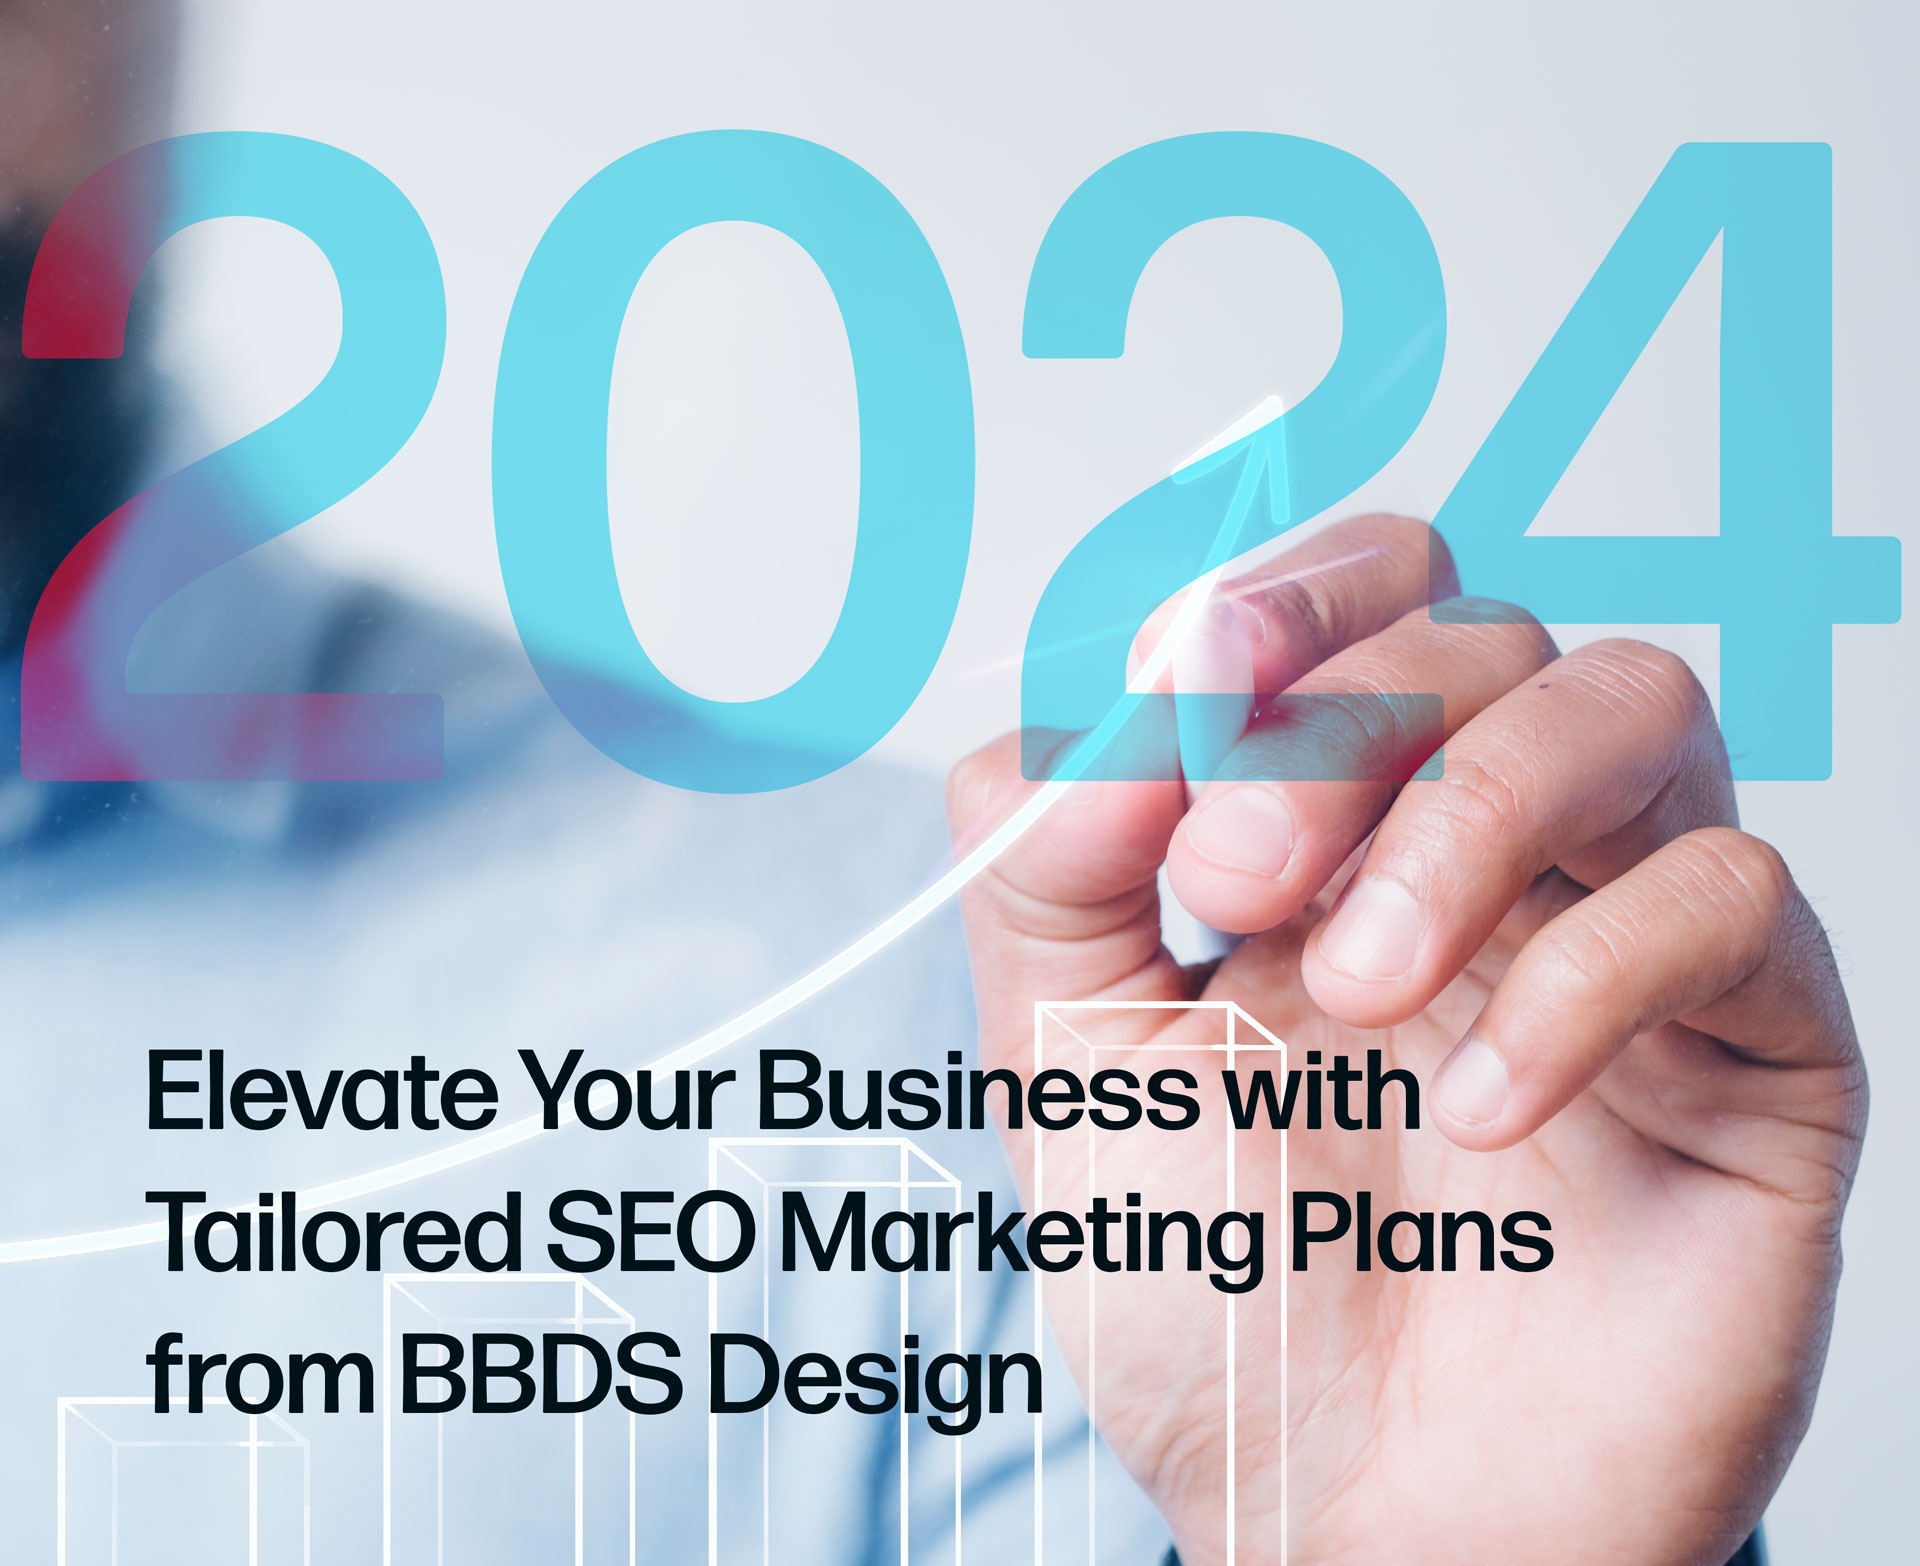 Elevate Your Business with Tailored SEO Marketing Plans from BBDS Design